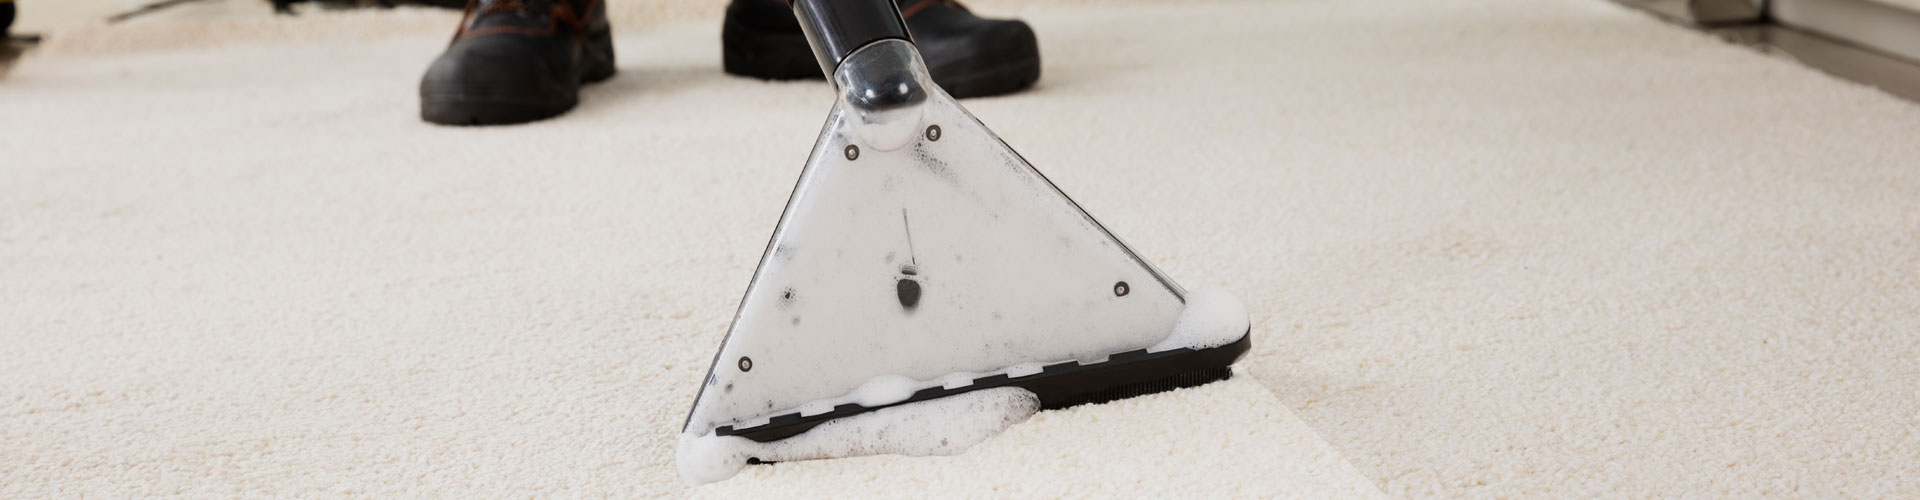  A Person Cleaning Carpet With Vacuum Cleaner